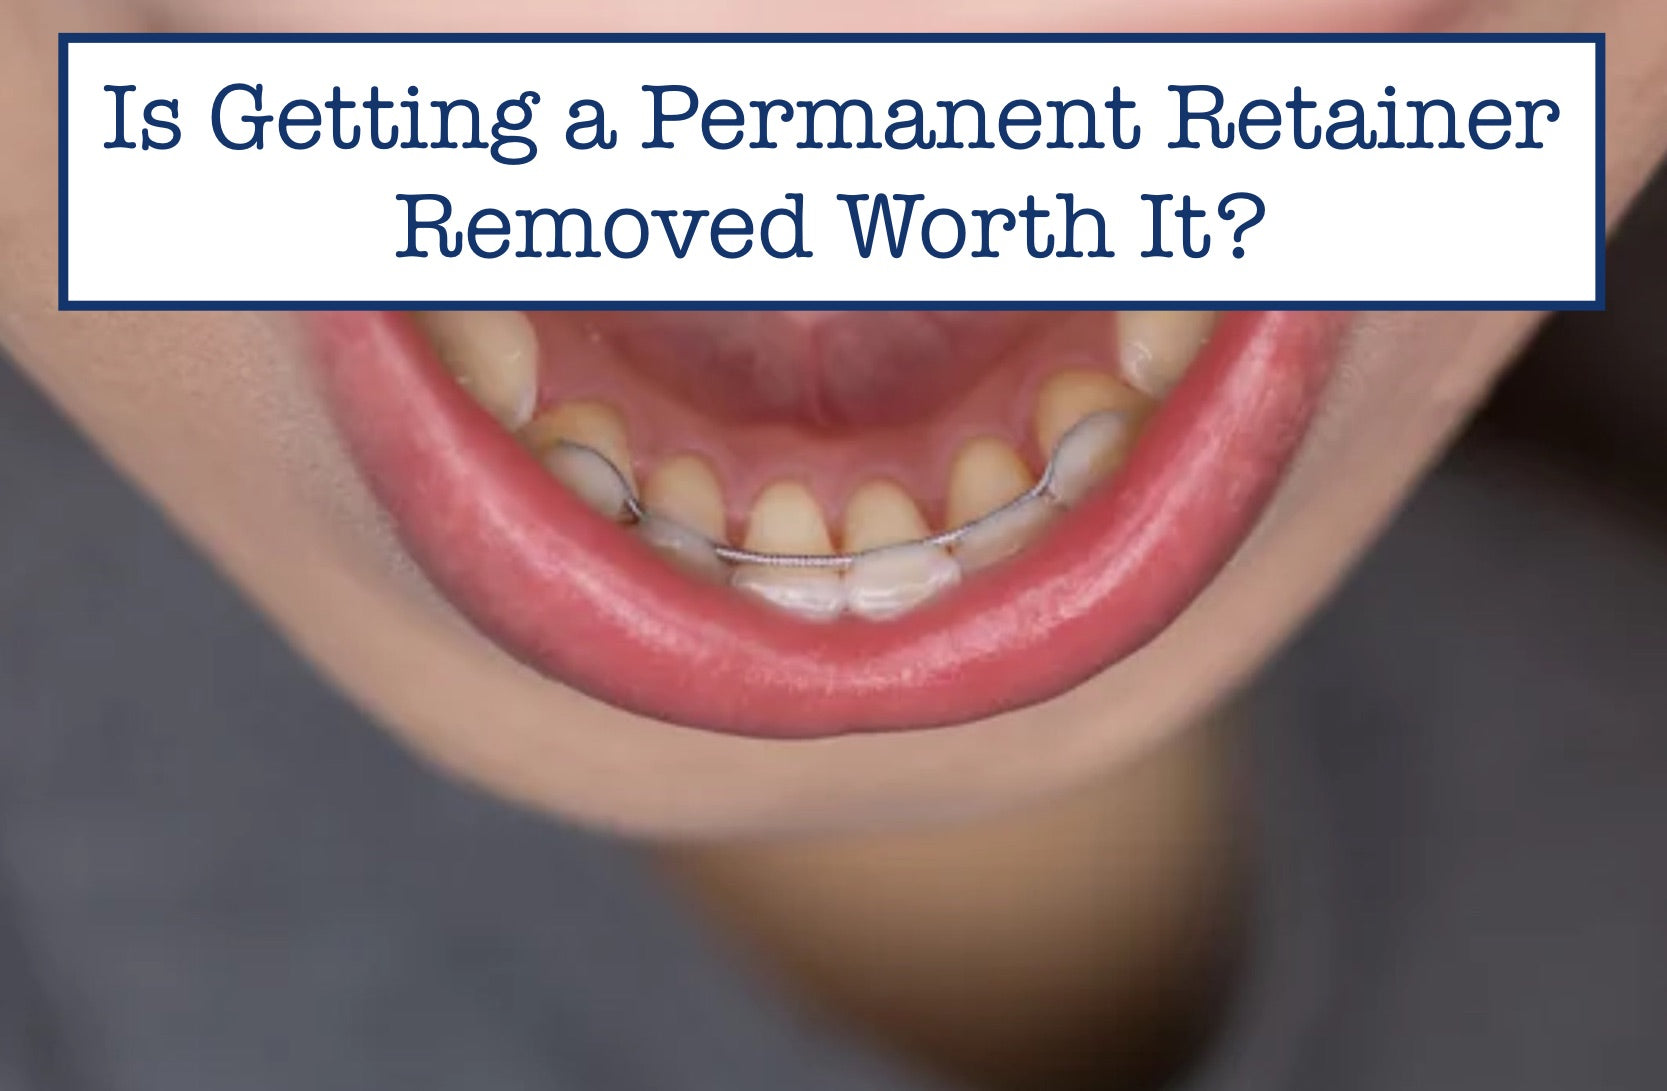 Is Getting a Permanent Retainer Removed Worth It?